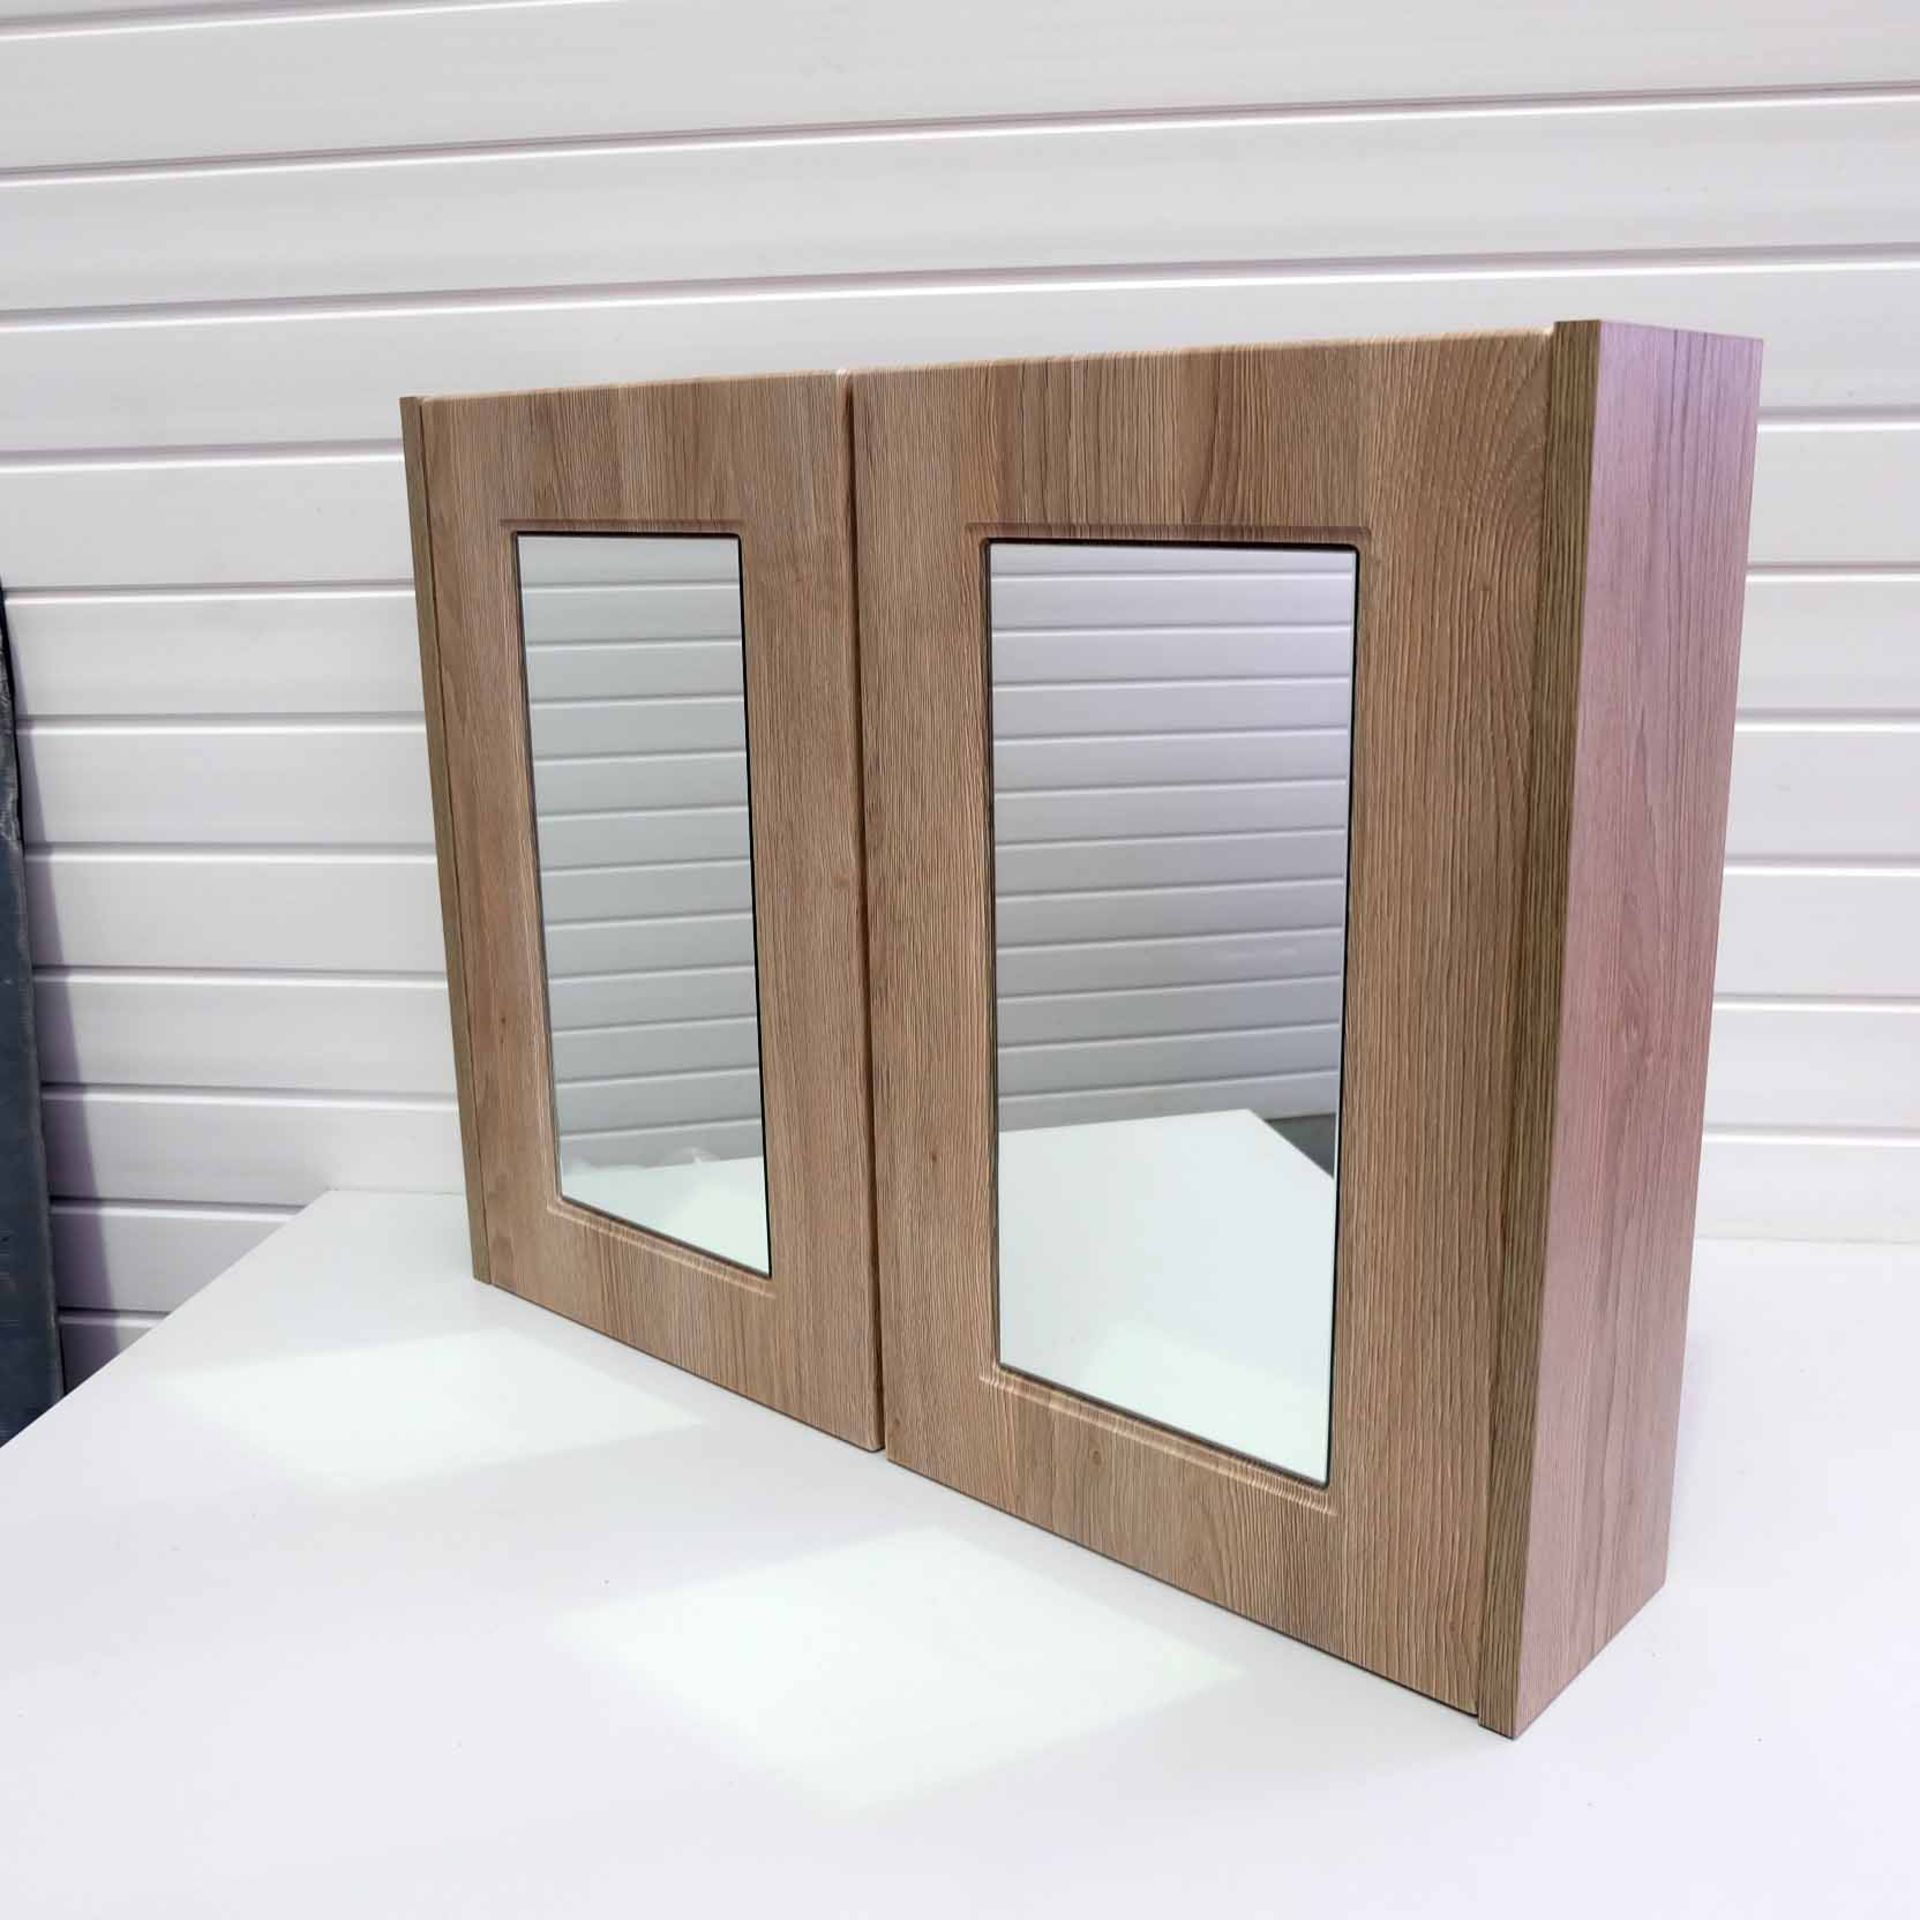 Mirrored Two Door Cabinet. With 1 x Shelf & 2 Handles. Size 790mm W x 162mm D x 597mm H.